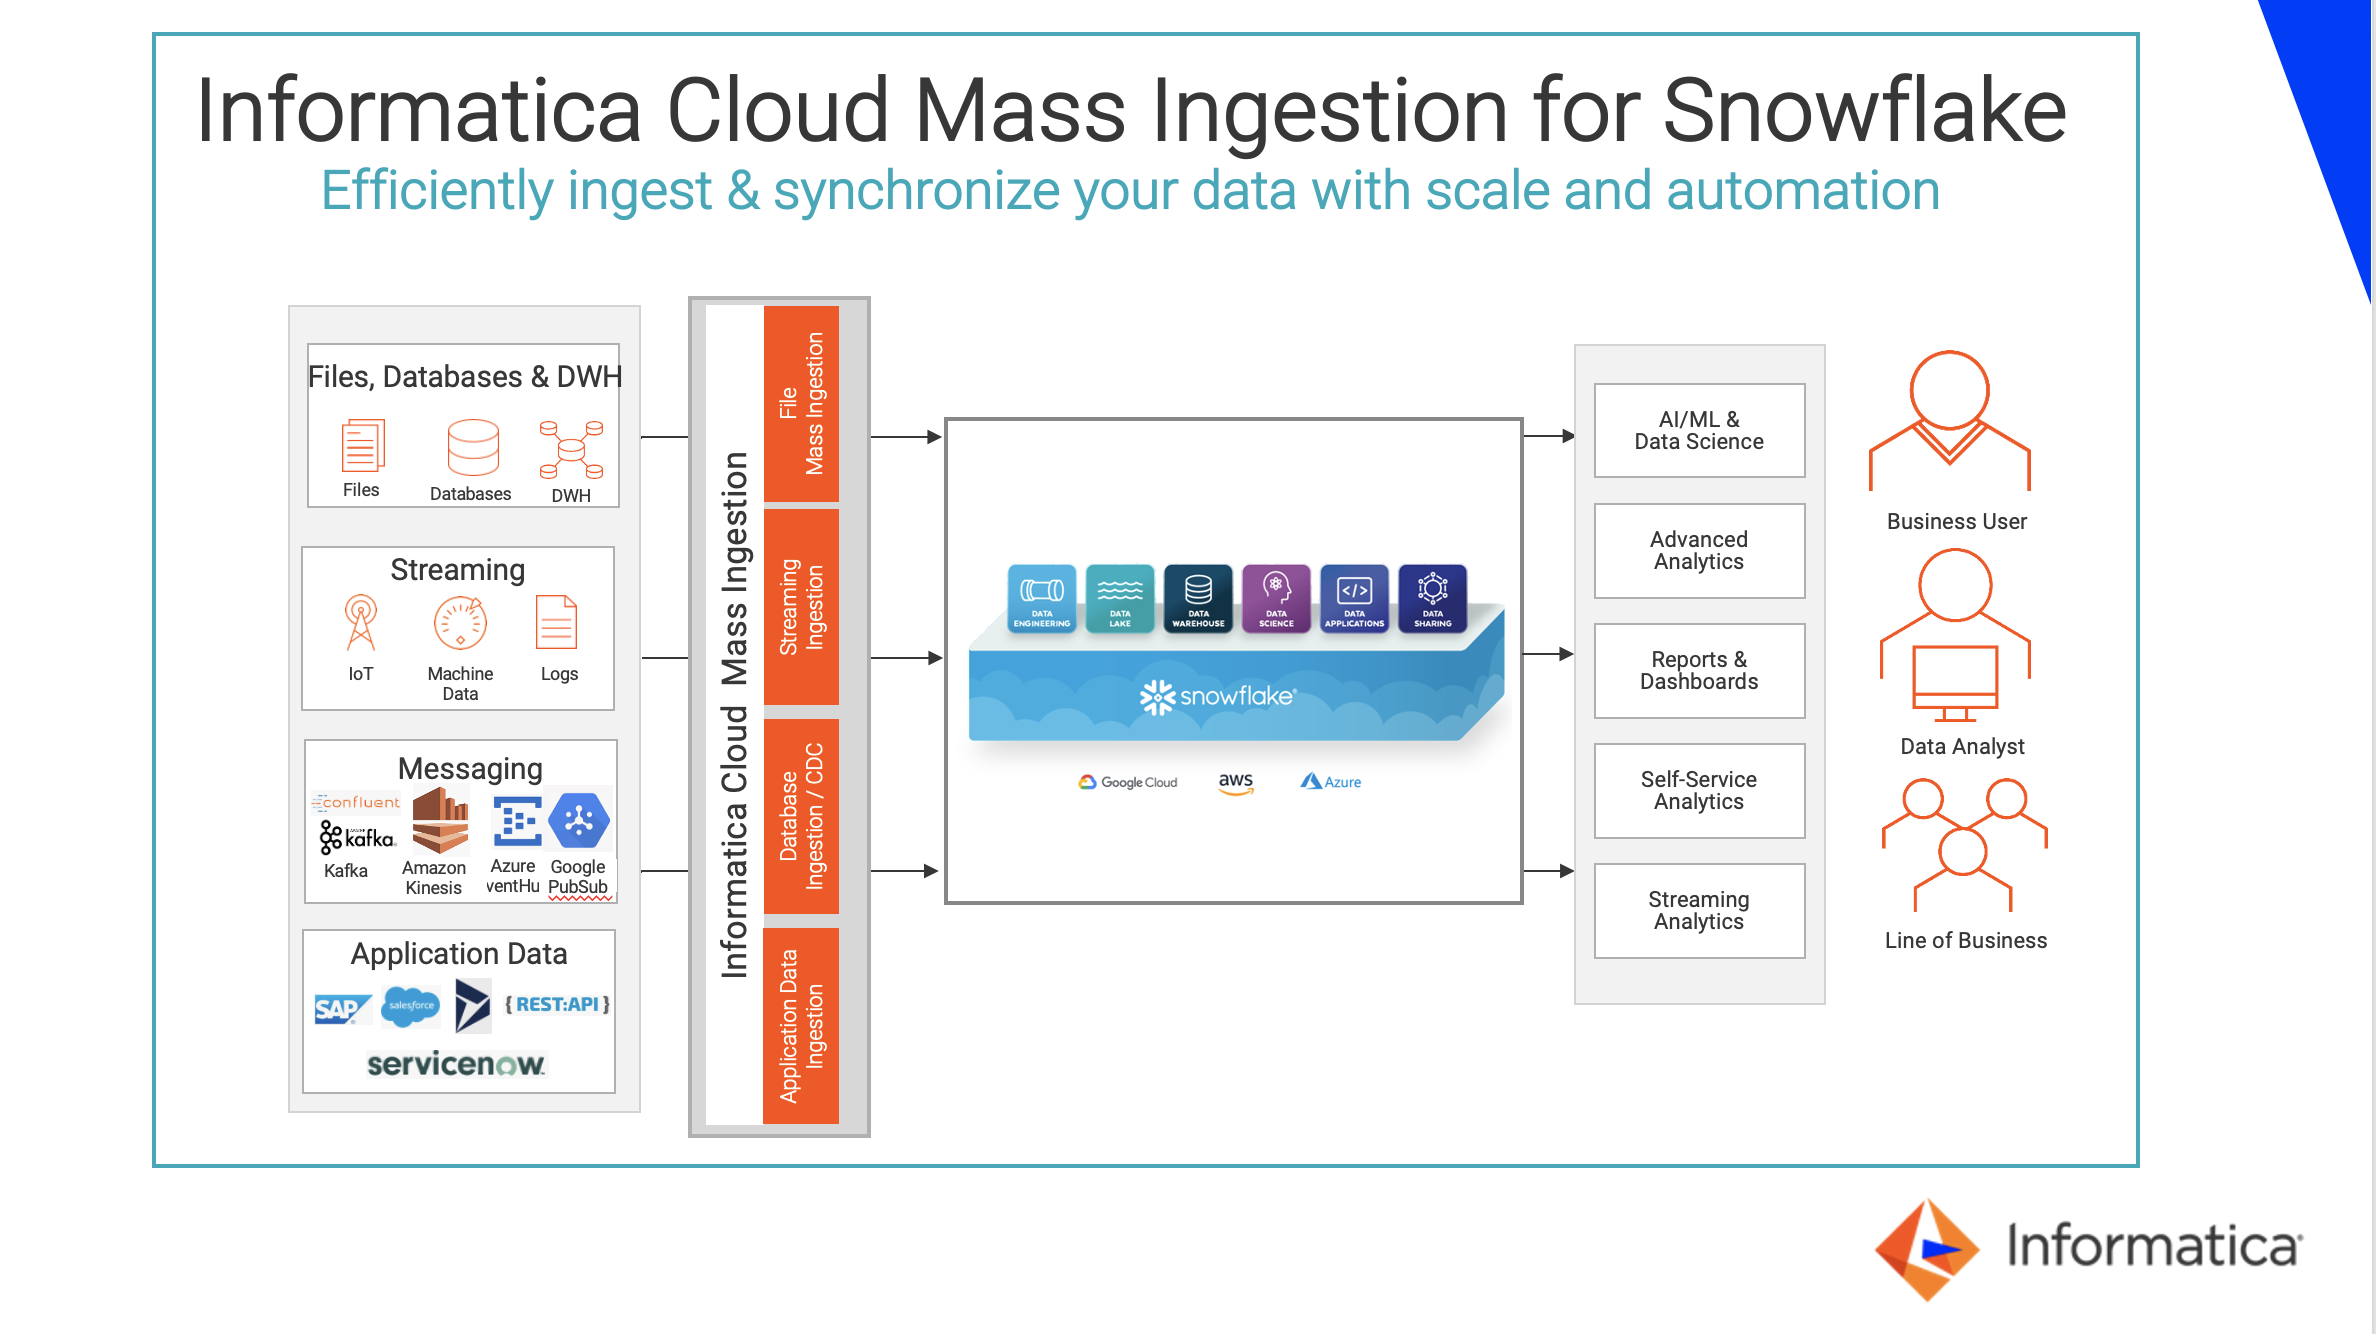 Flowchart of how Informatica performs cloud mass ingestion for Snowflake